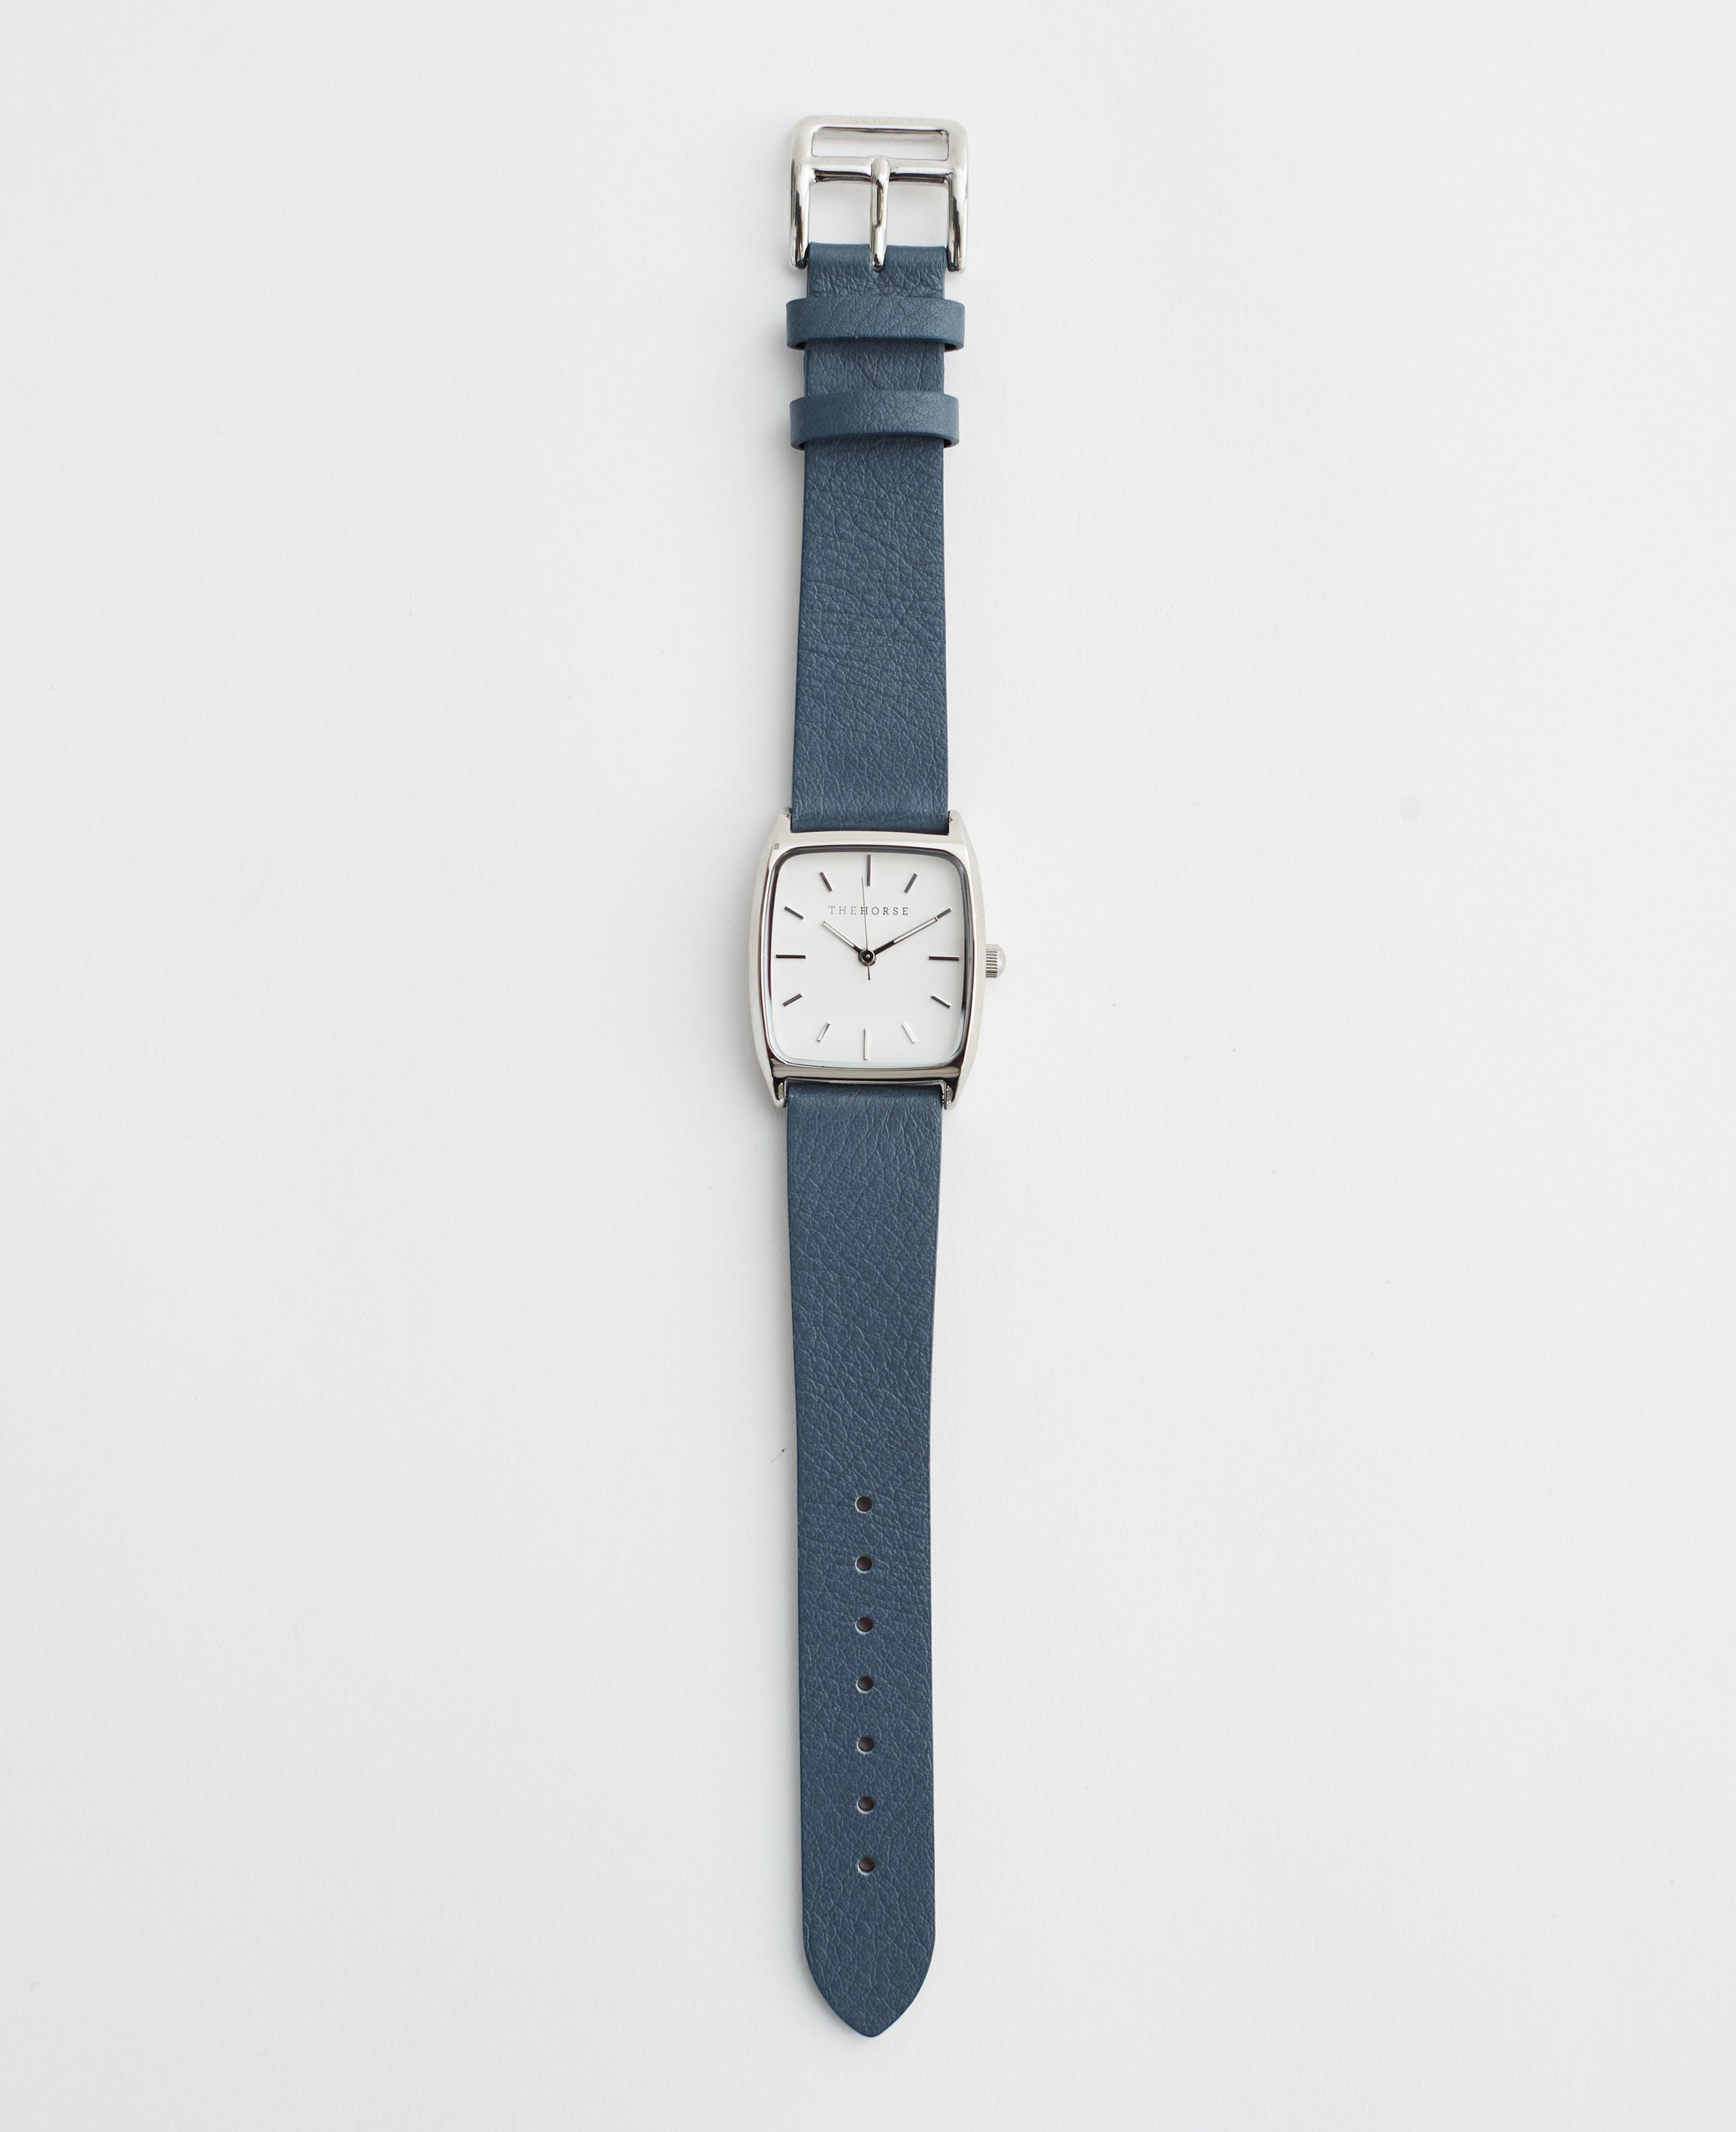 The Dress Watch: Polished Silver Case / White Dial / Stonewash Leather Strap by The Horse®